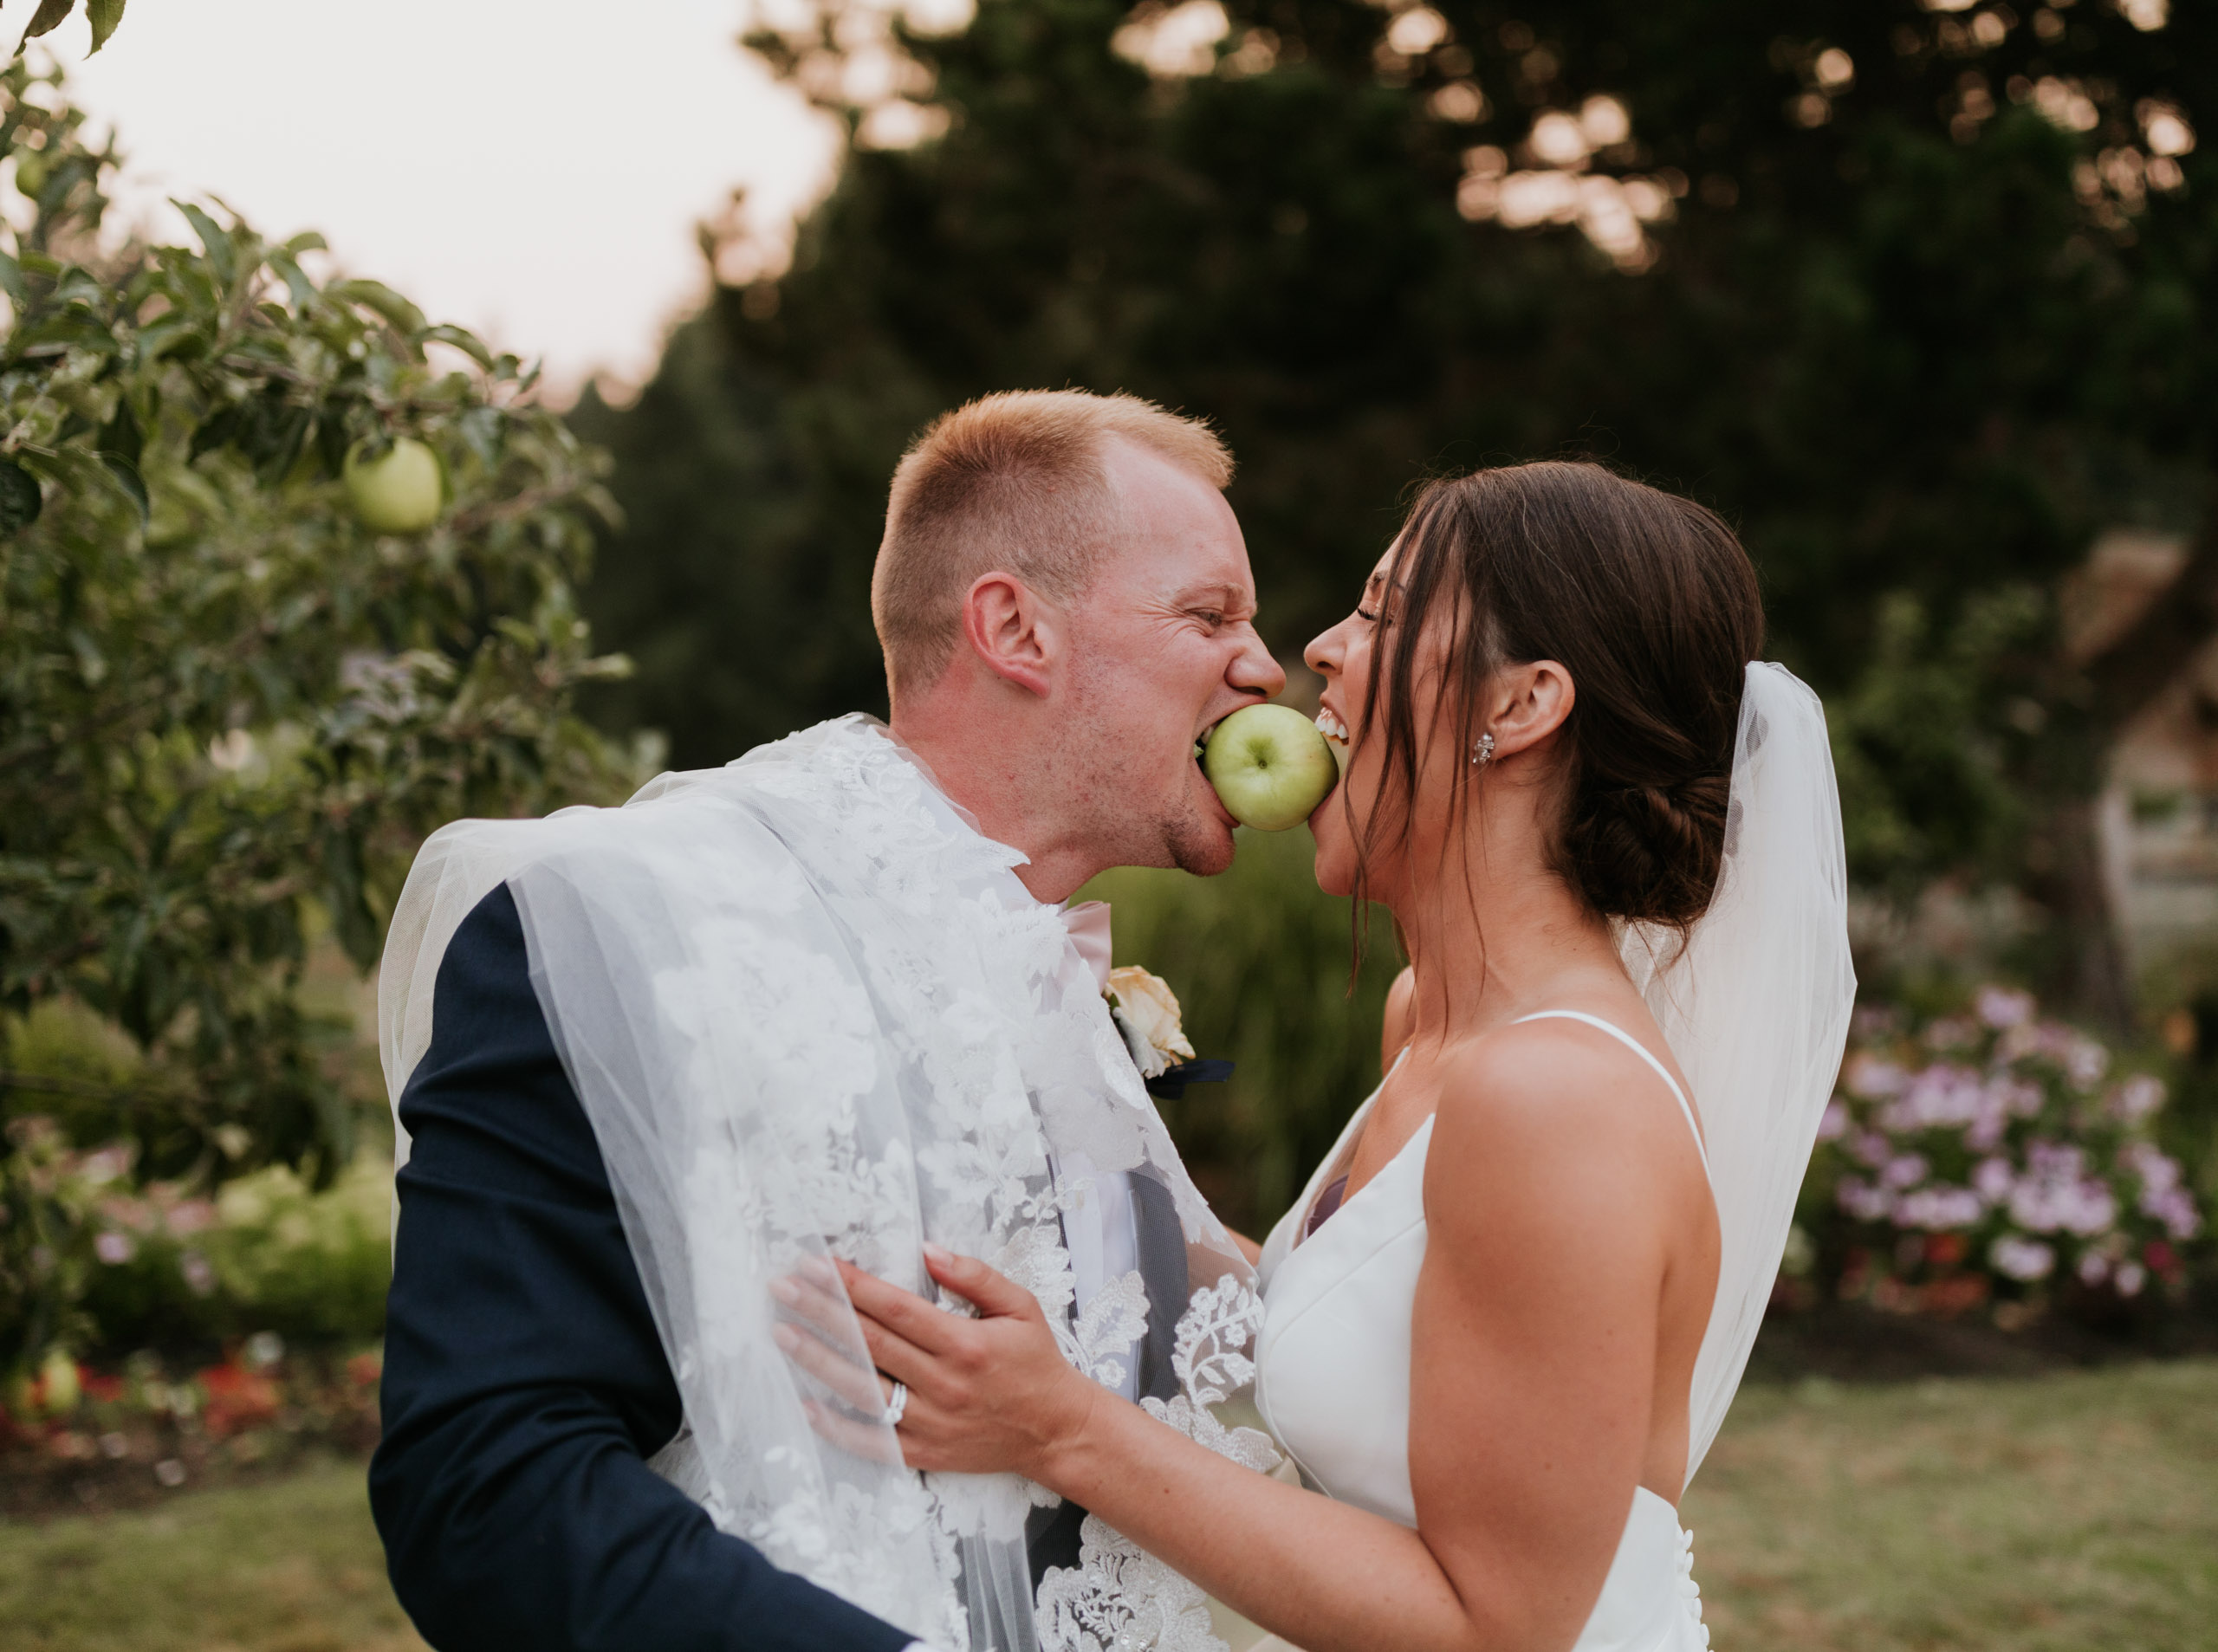 https://breannapluskevin.com/wp-content/uploads/photo-gallery/imported_from_media_libray/kiana-lodge-wedding-bm-breanna-plus-kevin-48.jpg